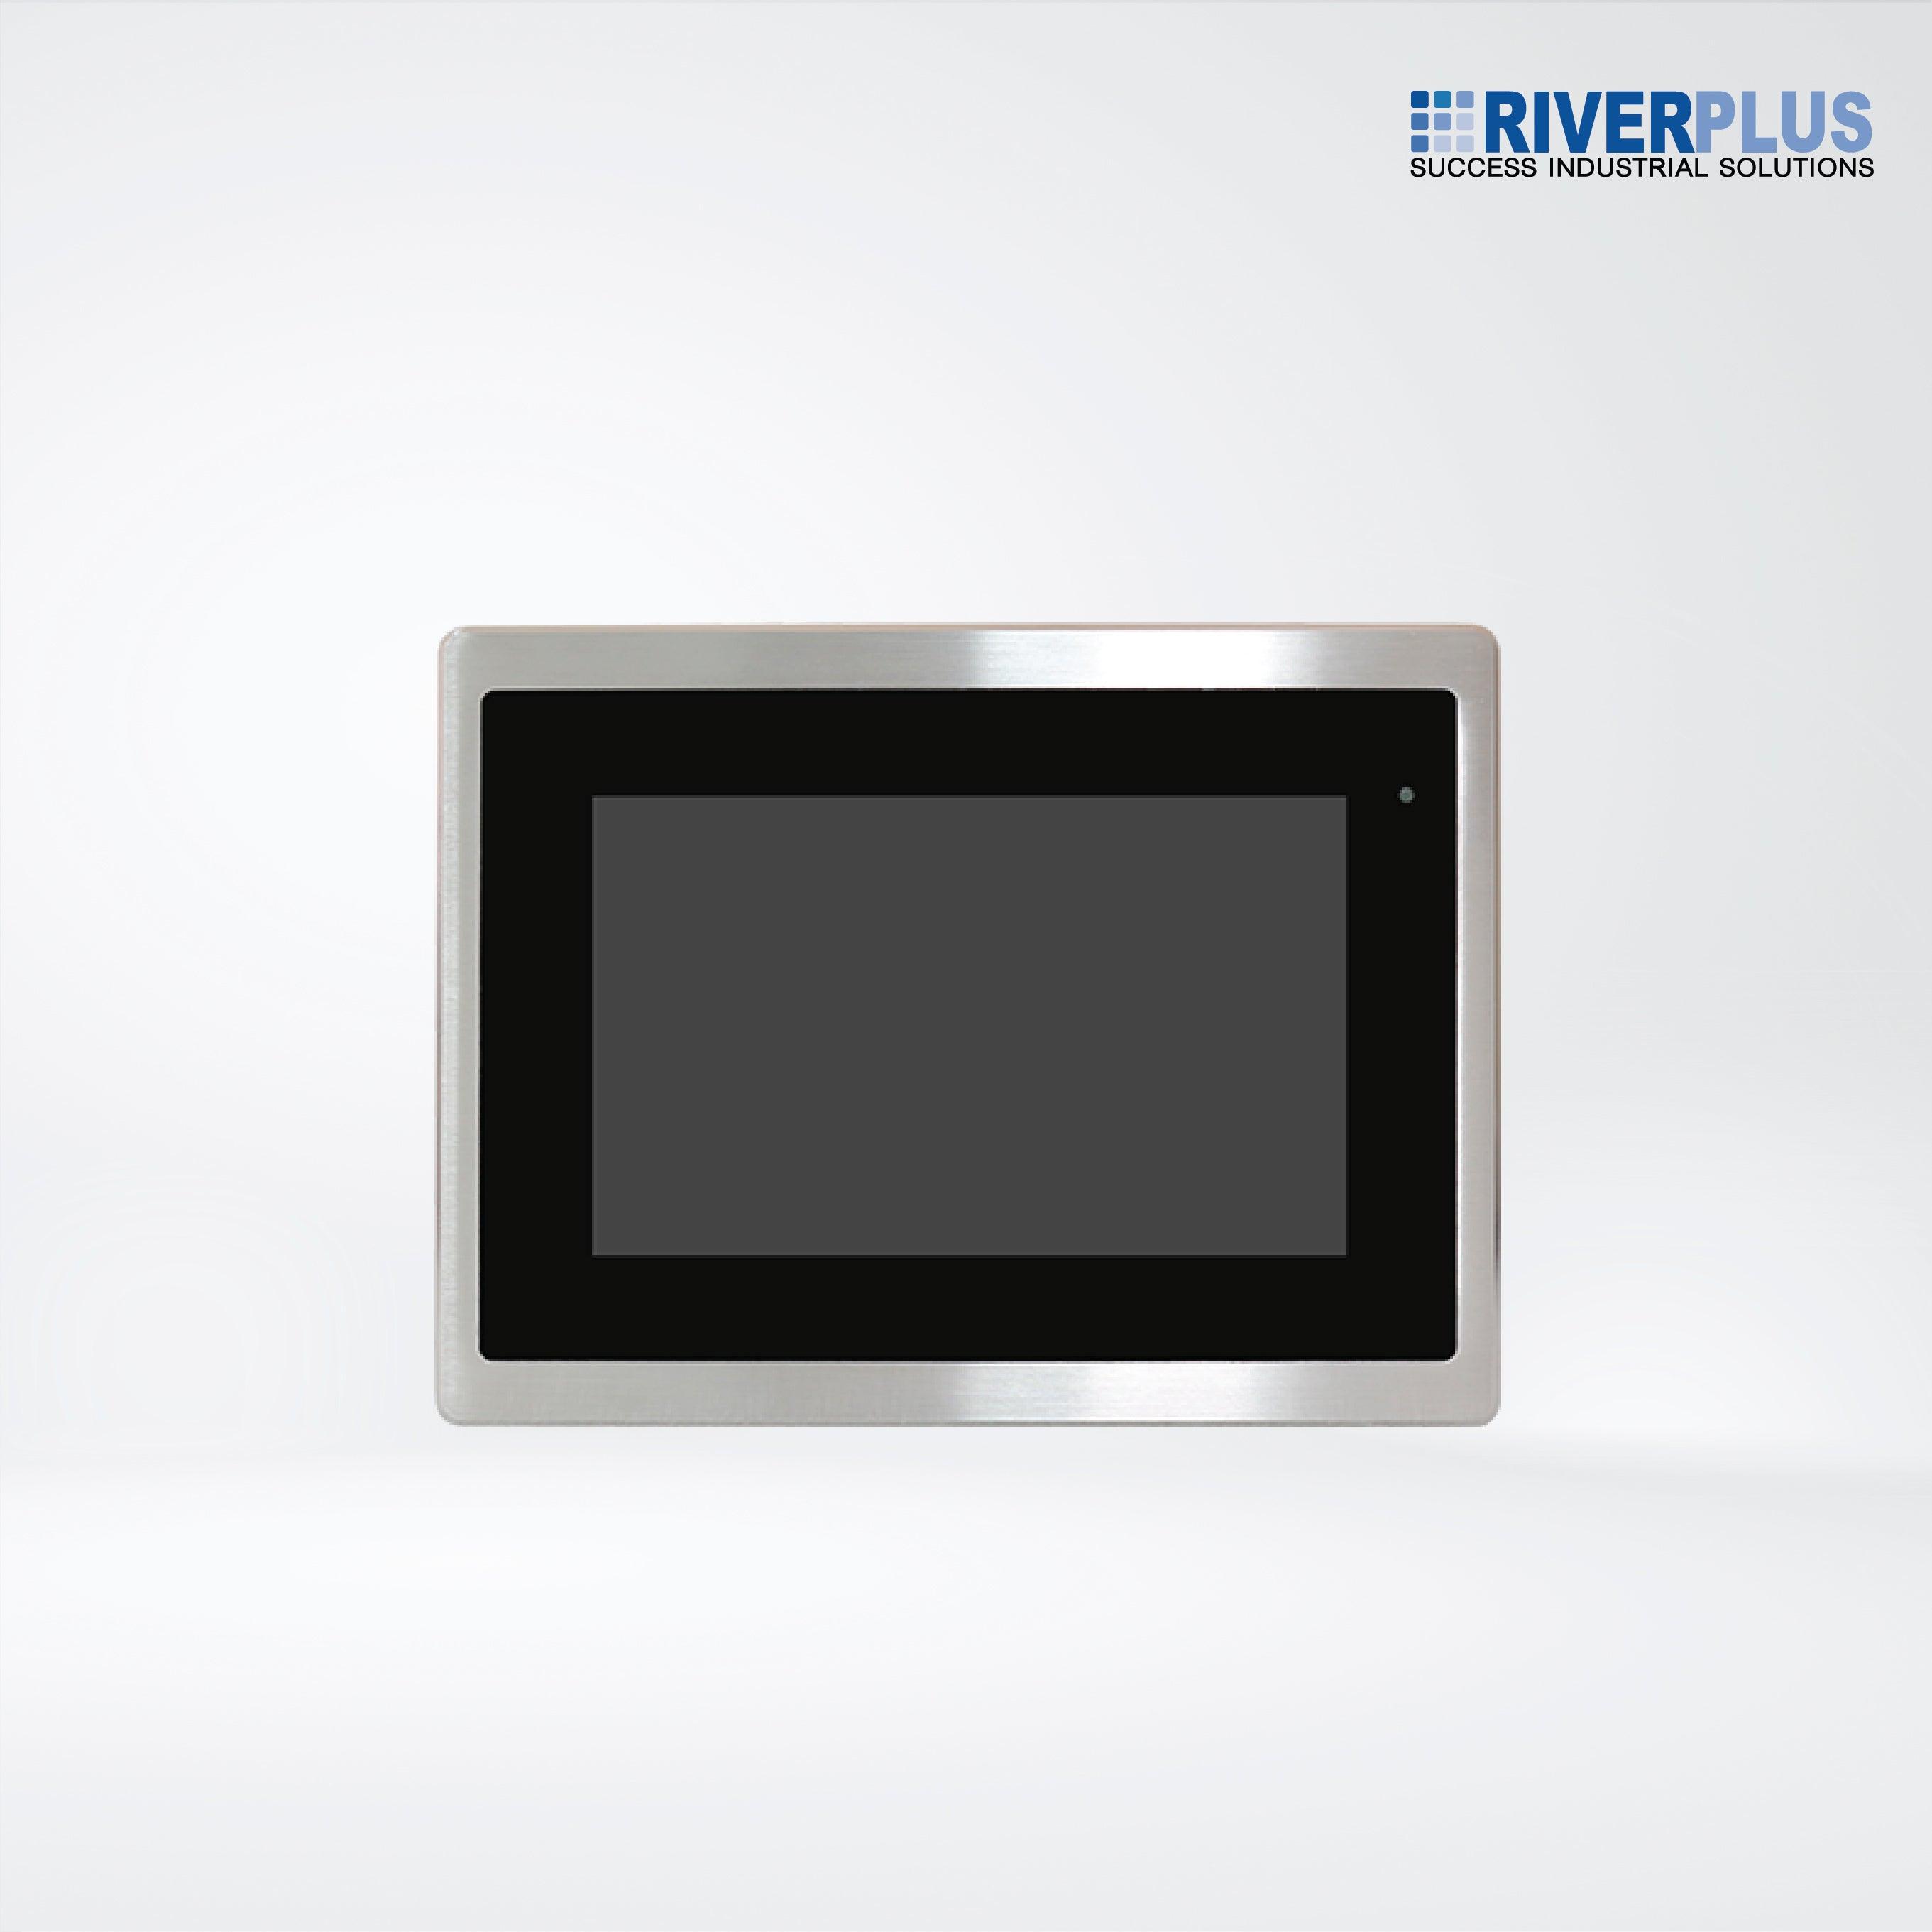 FABS-107RH 7” Flat Front Panel IP66 Stainless Chassis Display - Riverplus